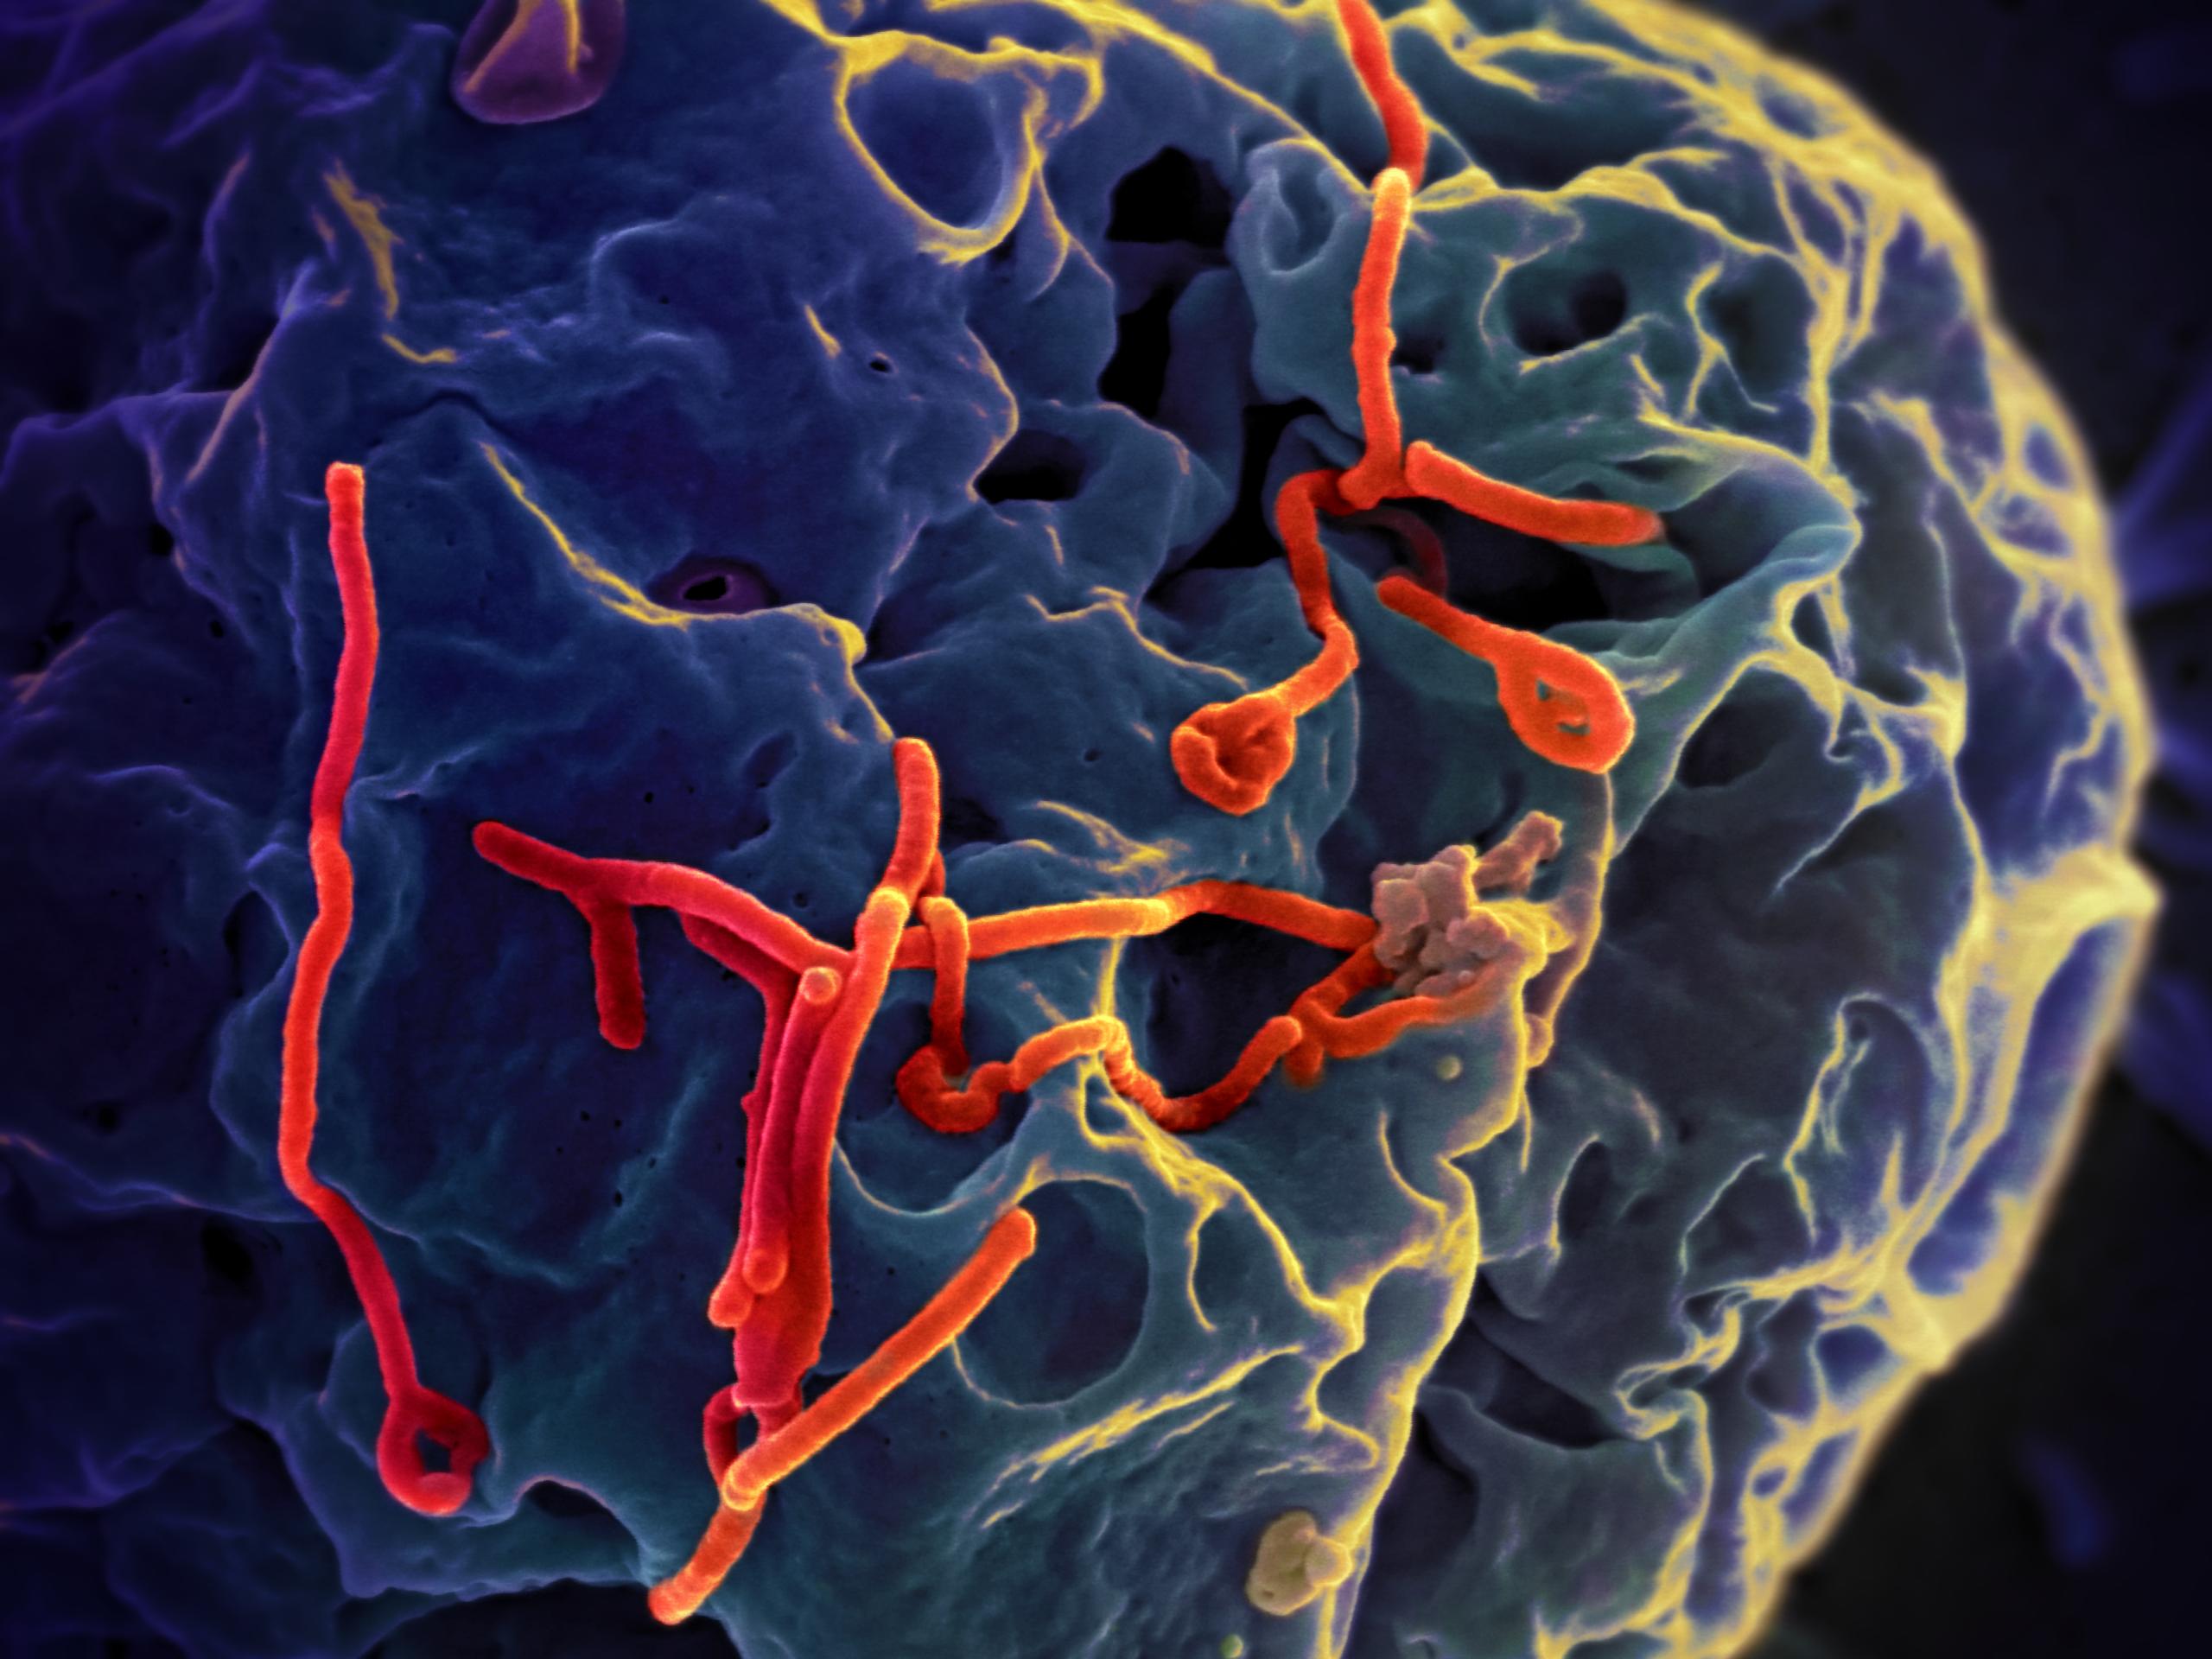 Ebola and genetic modification